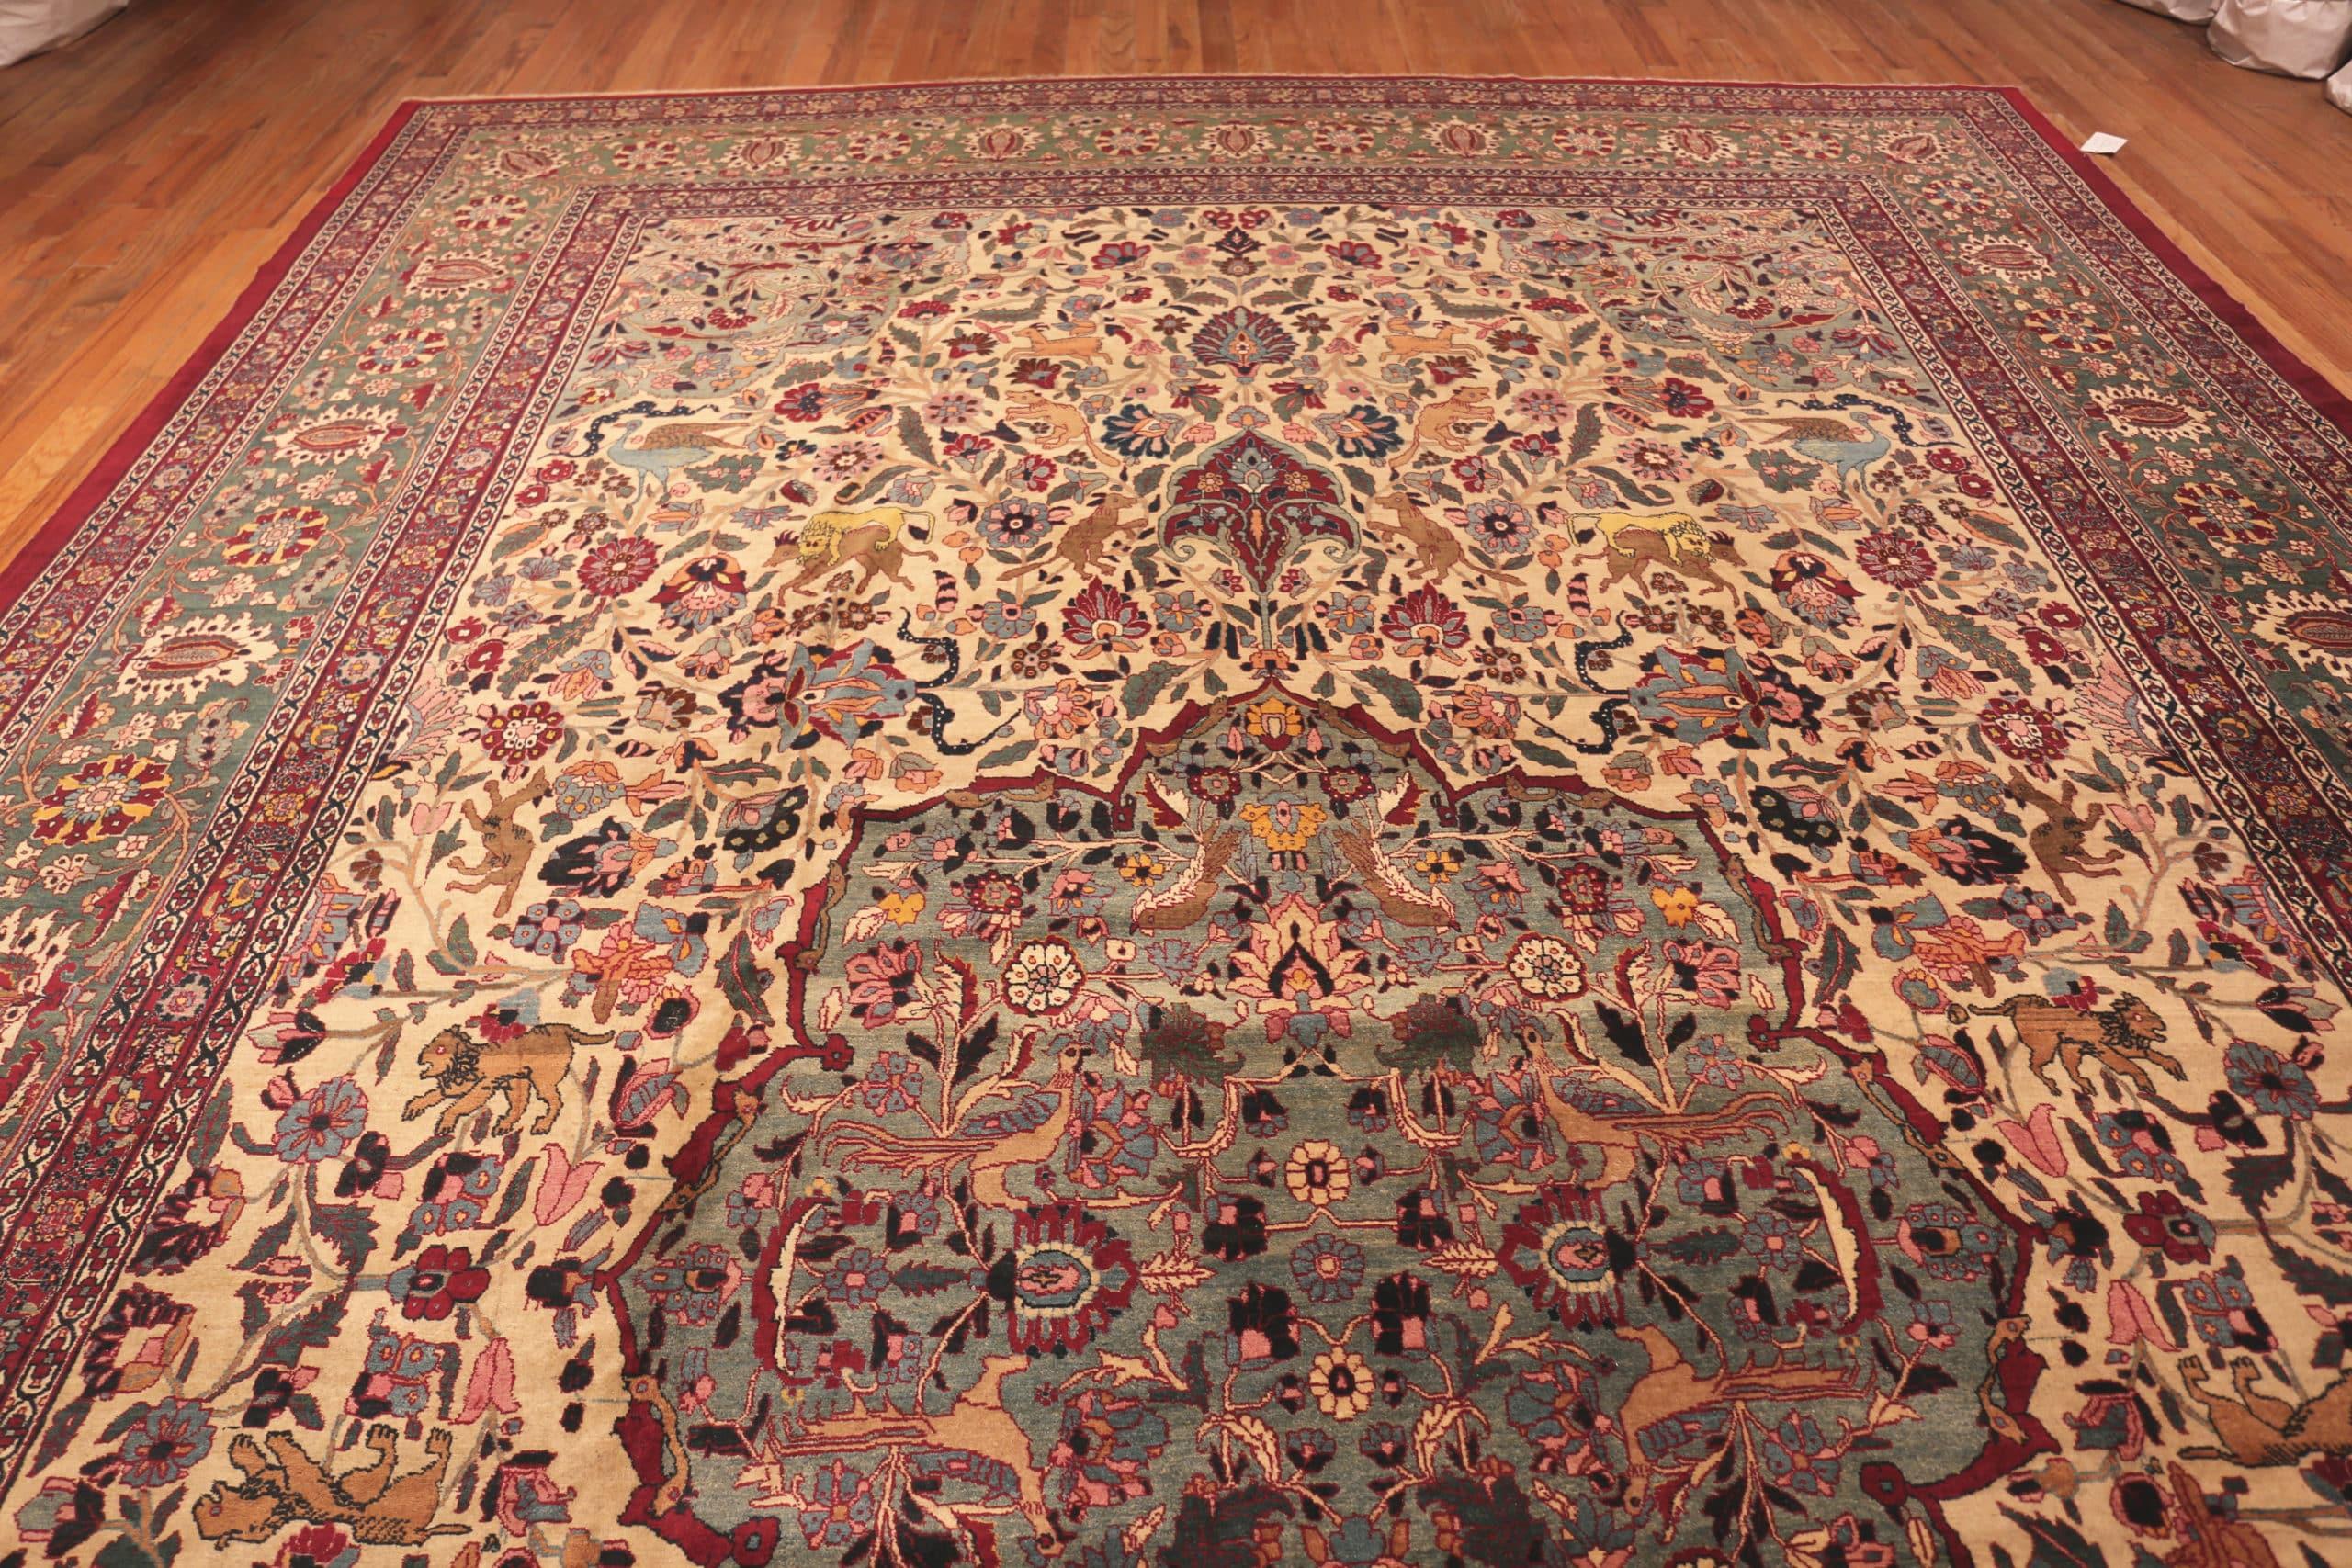 20th Century Antique Persian Tehran Rug. Size: 12 ft 6 in x 19 ft 6 in